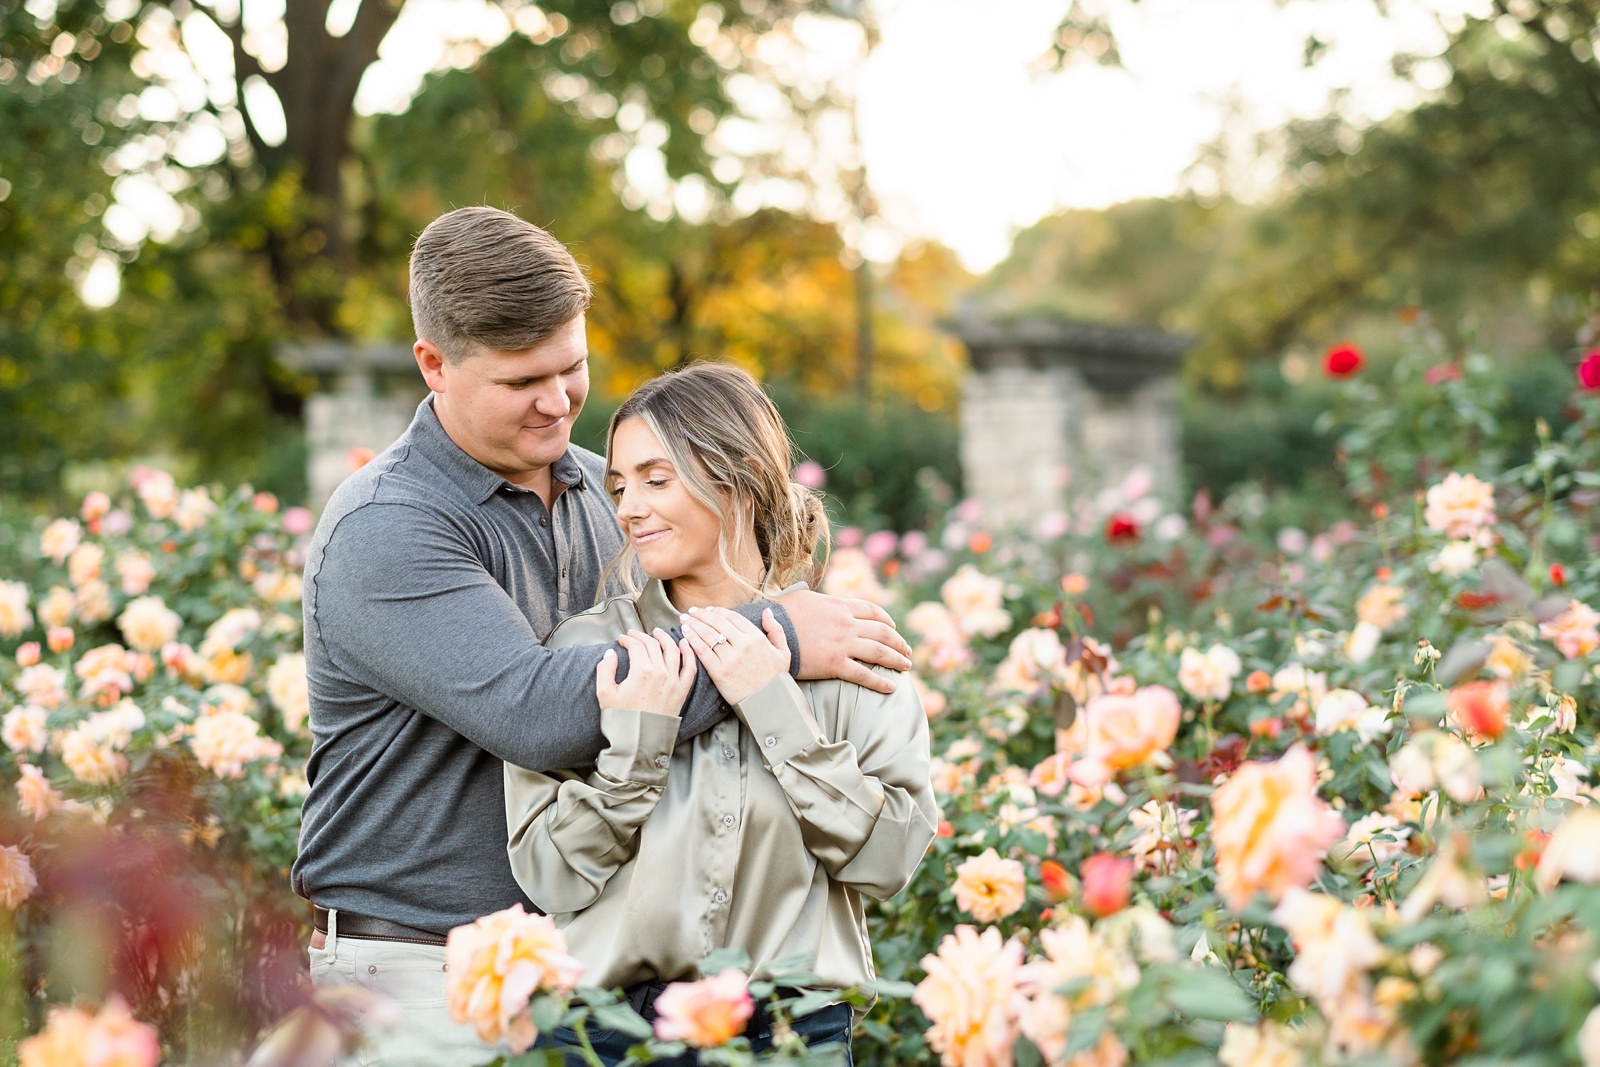 loose Park fall engagement session ideas